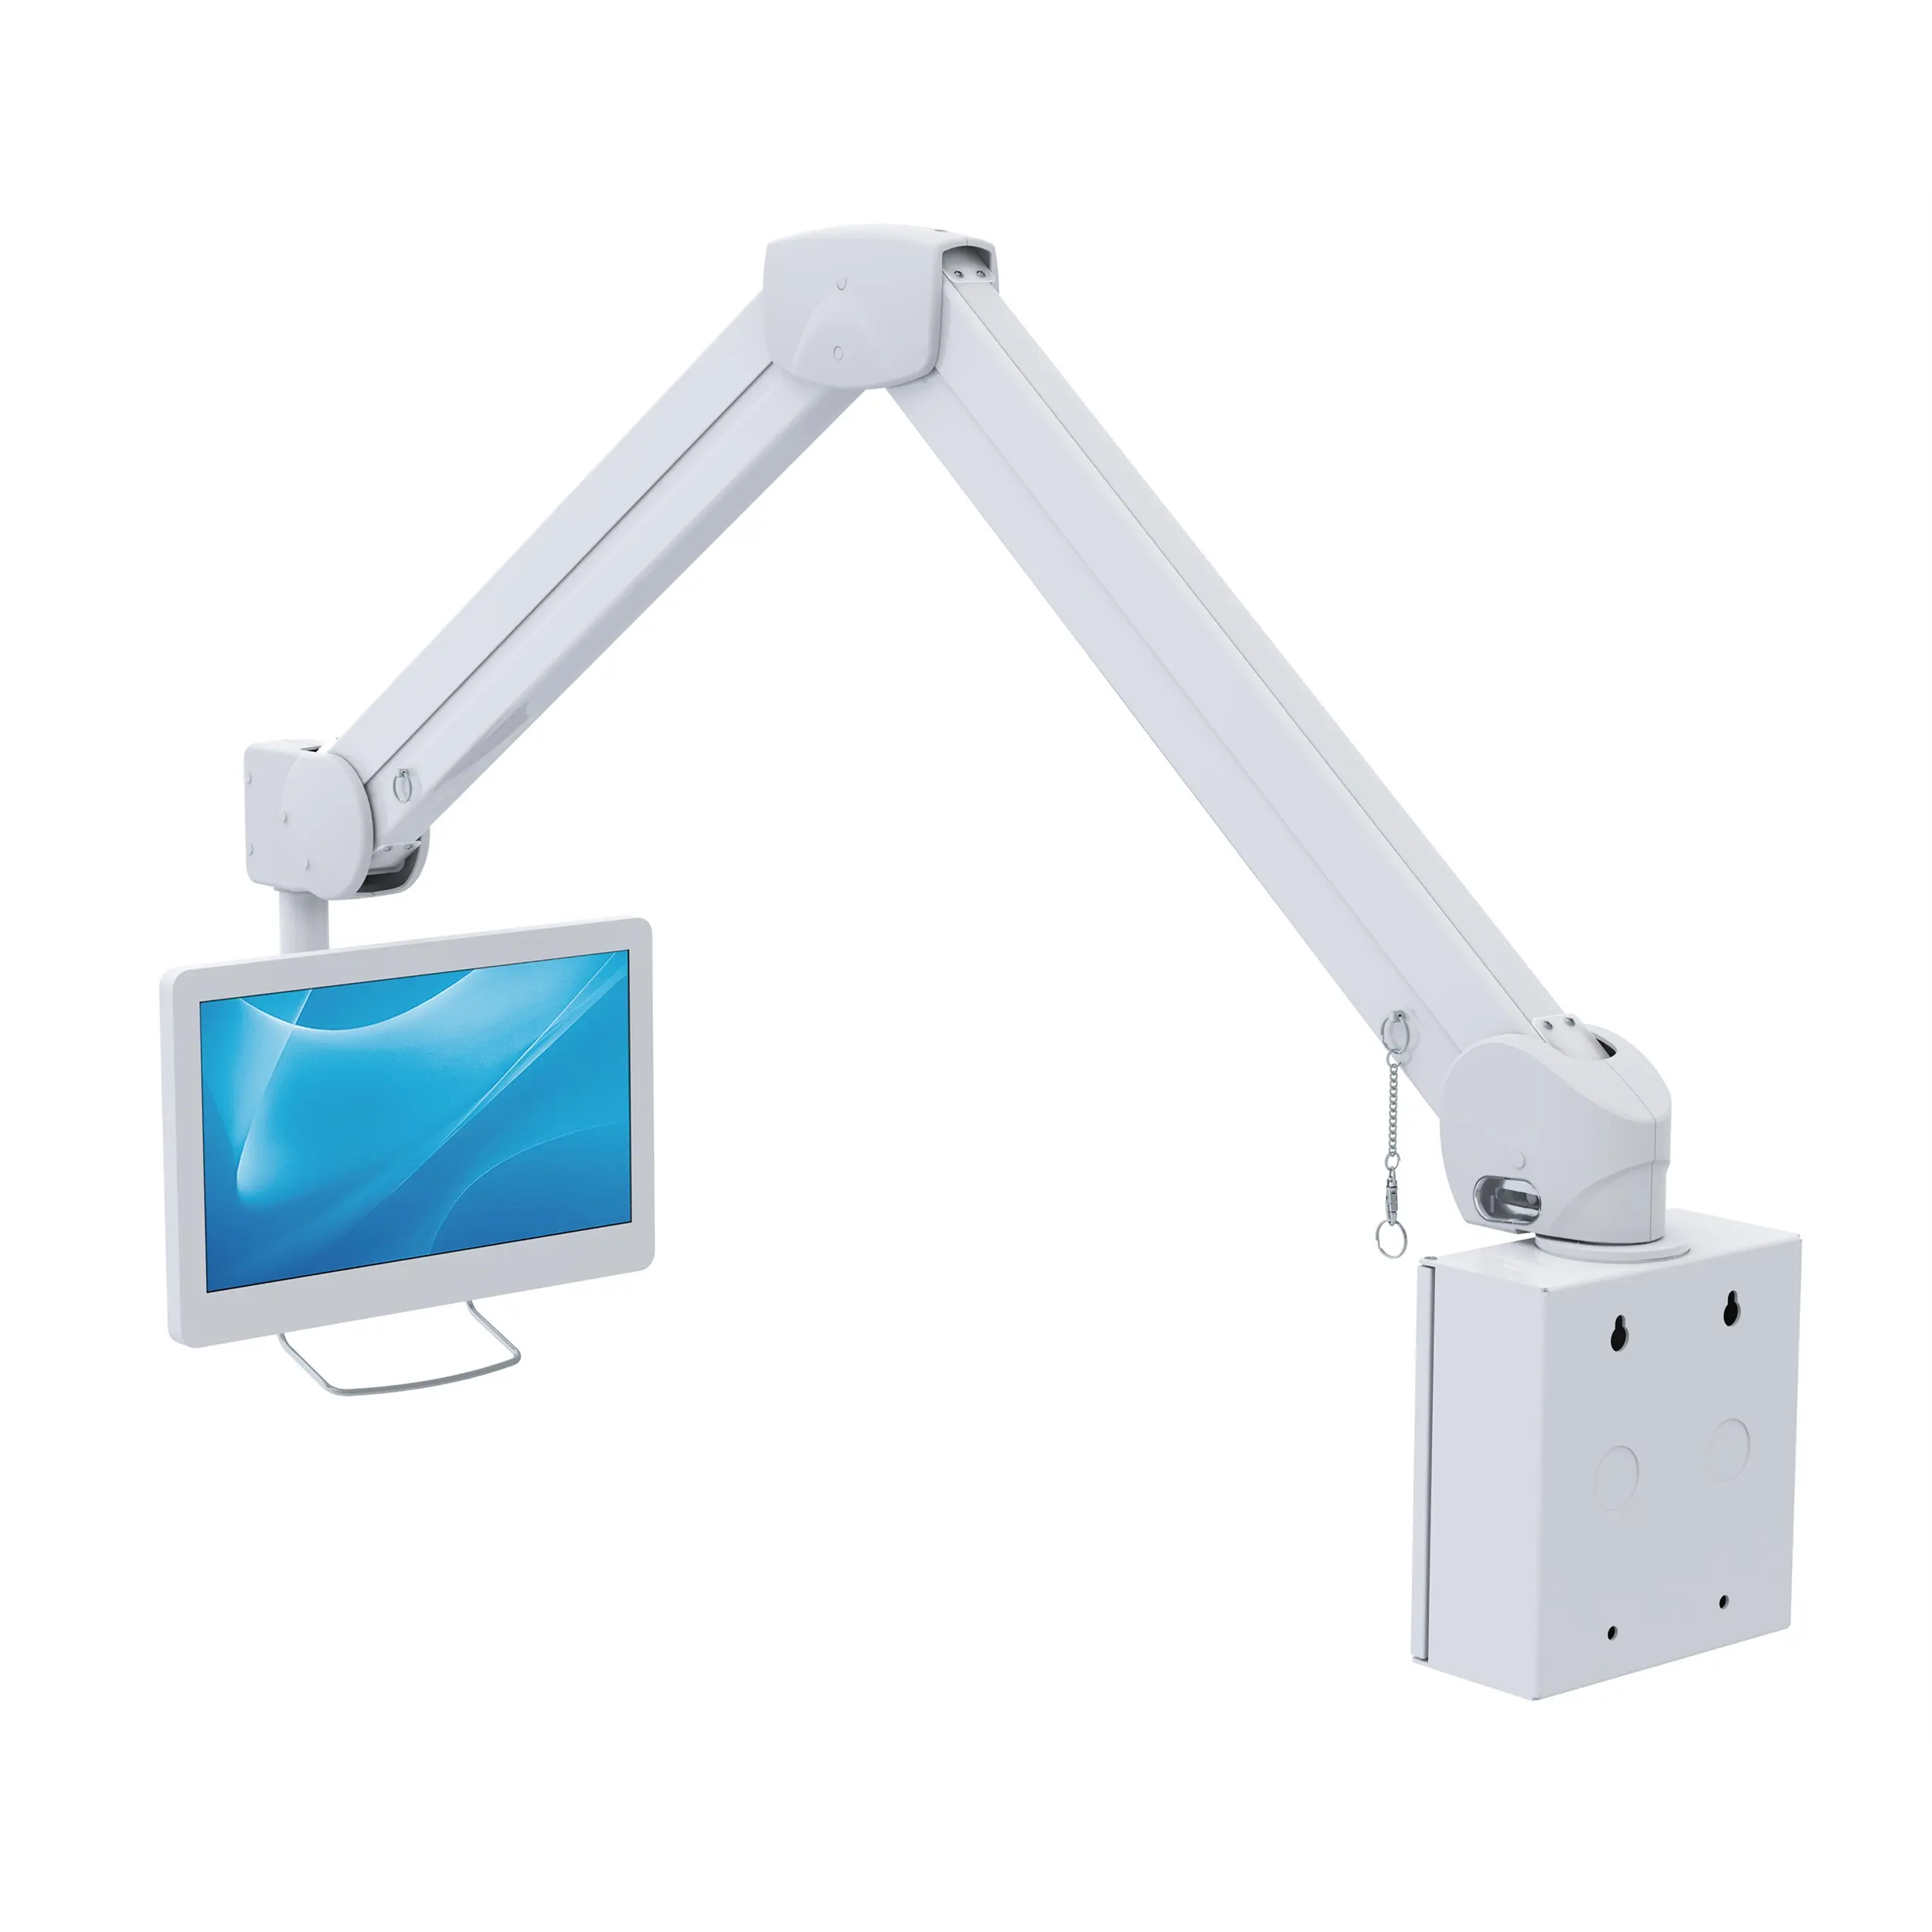 Hospital LCD Arm Monitor Mount with Wall Mount Bracket Healthcare Arm for LCD TV Standard VESA 75 and 100mm Carry Max 8KG